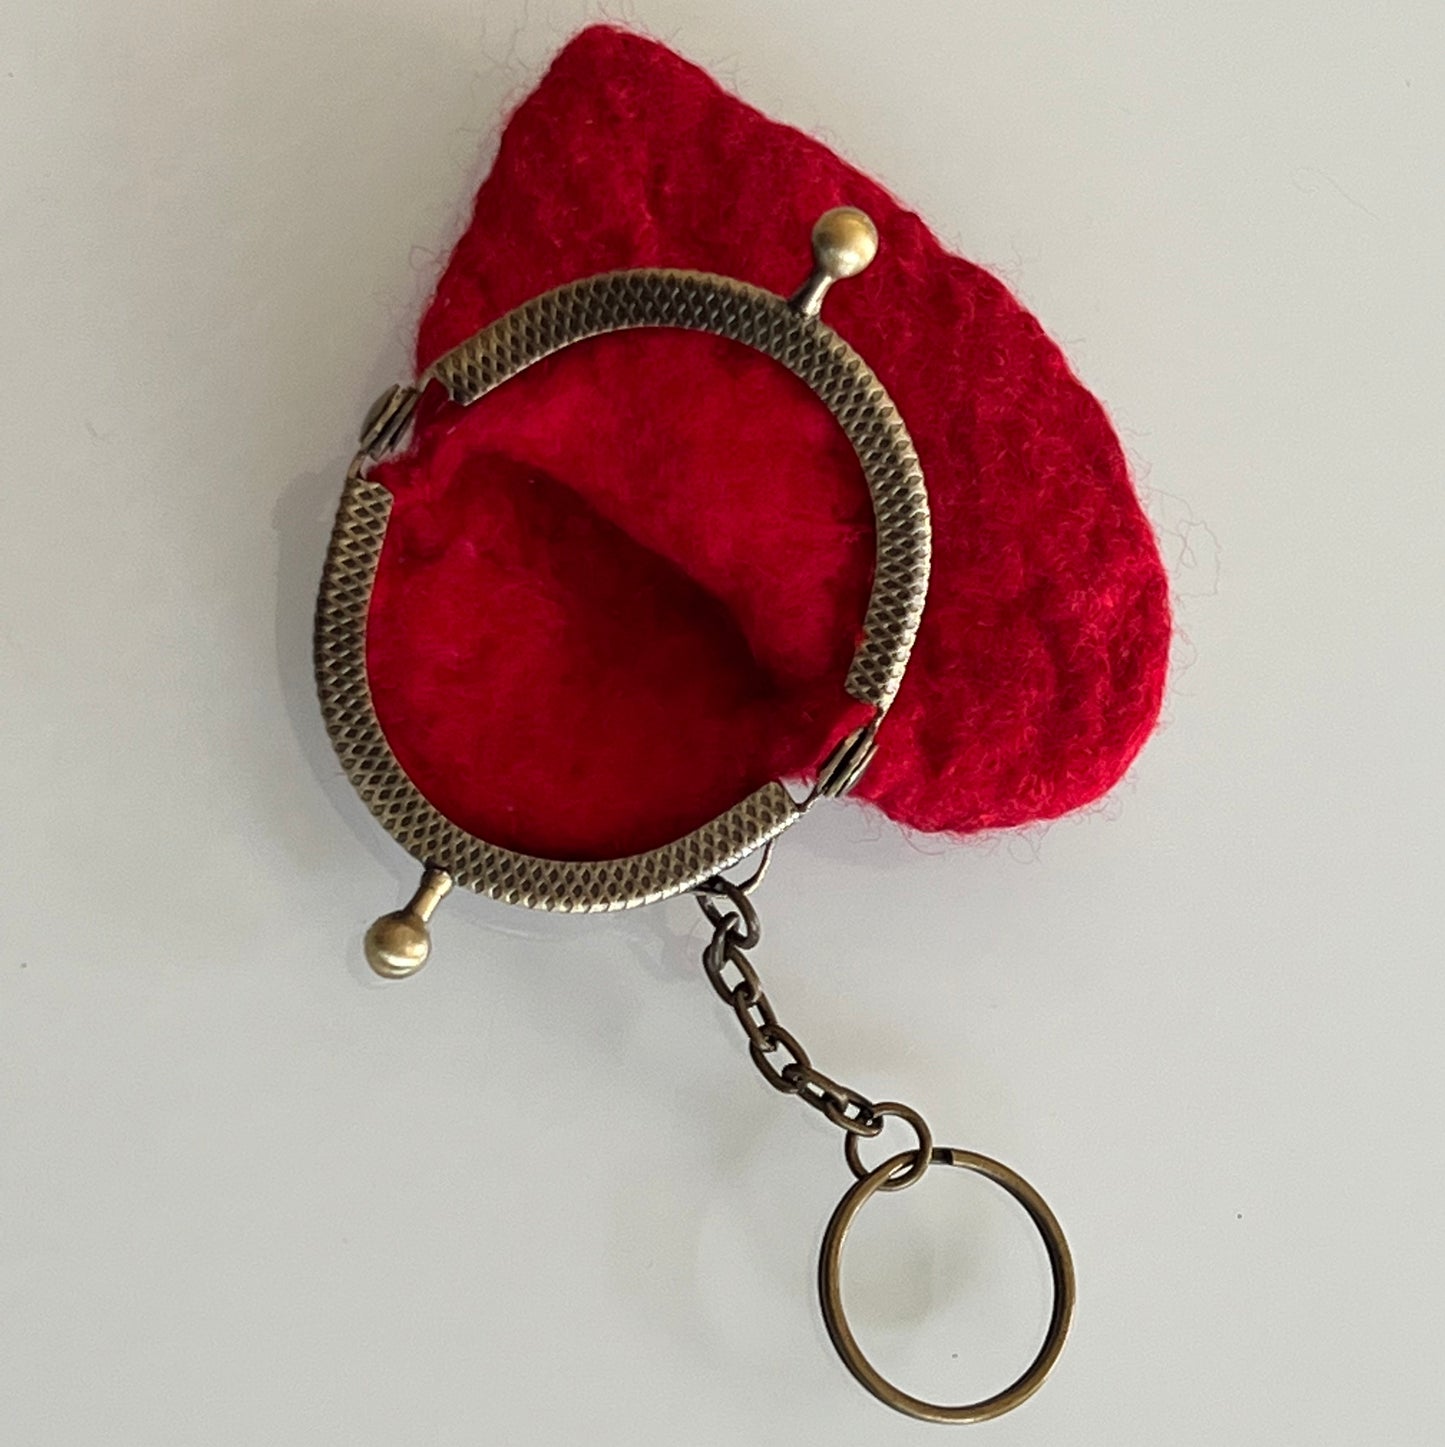 Heart Clasp Bag with Keyring